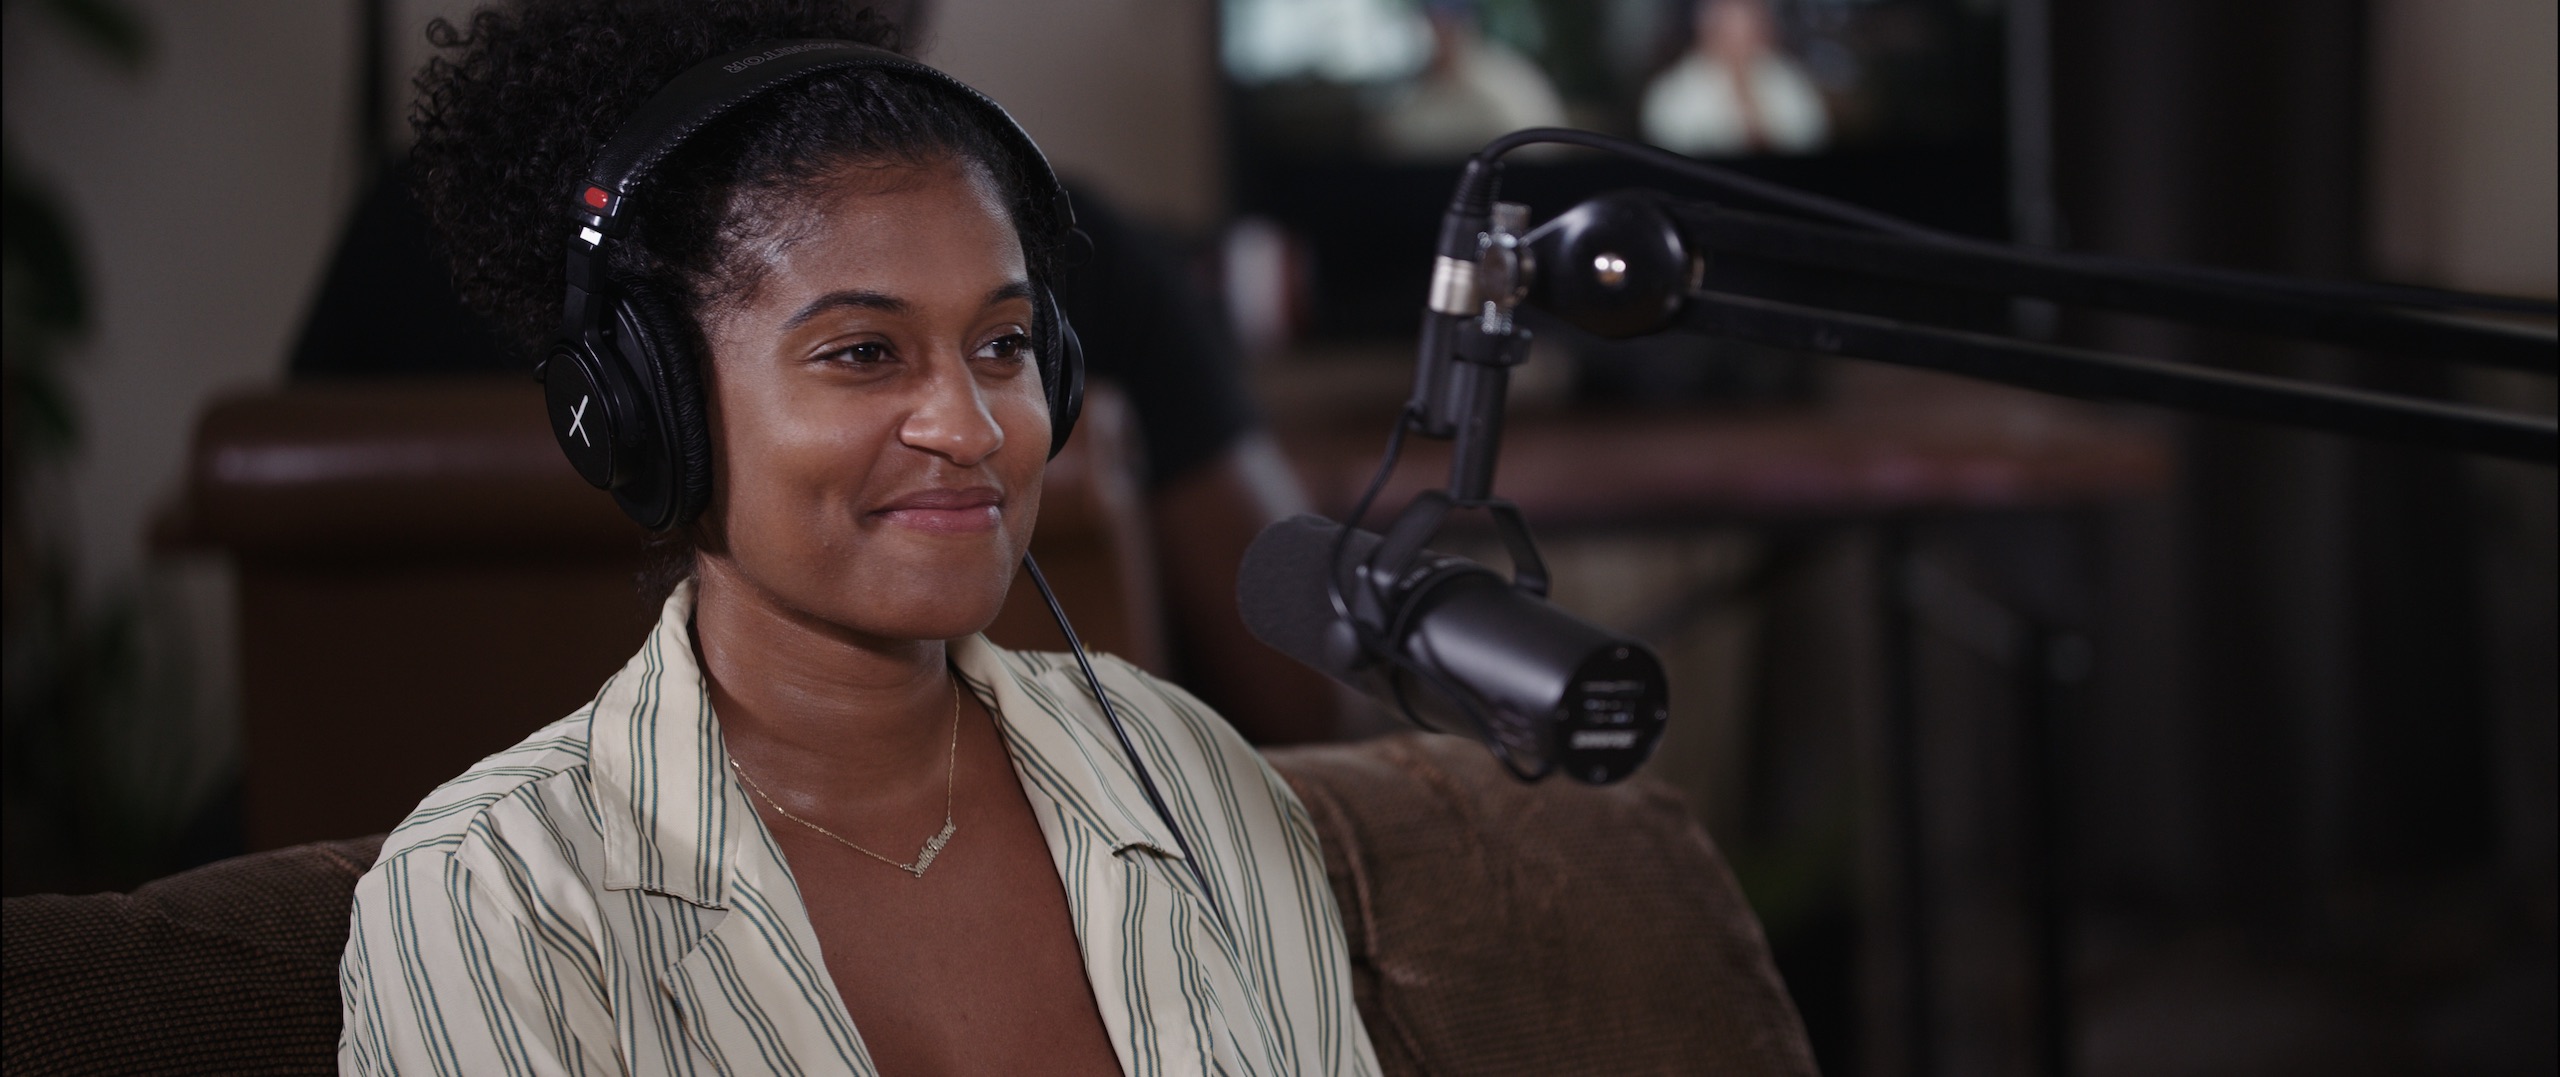 Uncreative Radio with Alexis Nichole Smith smiling by a microphone wearing headphones